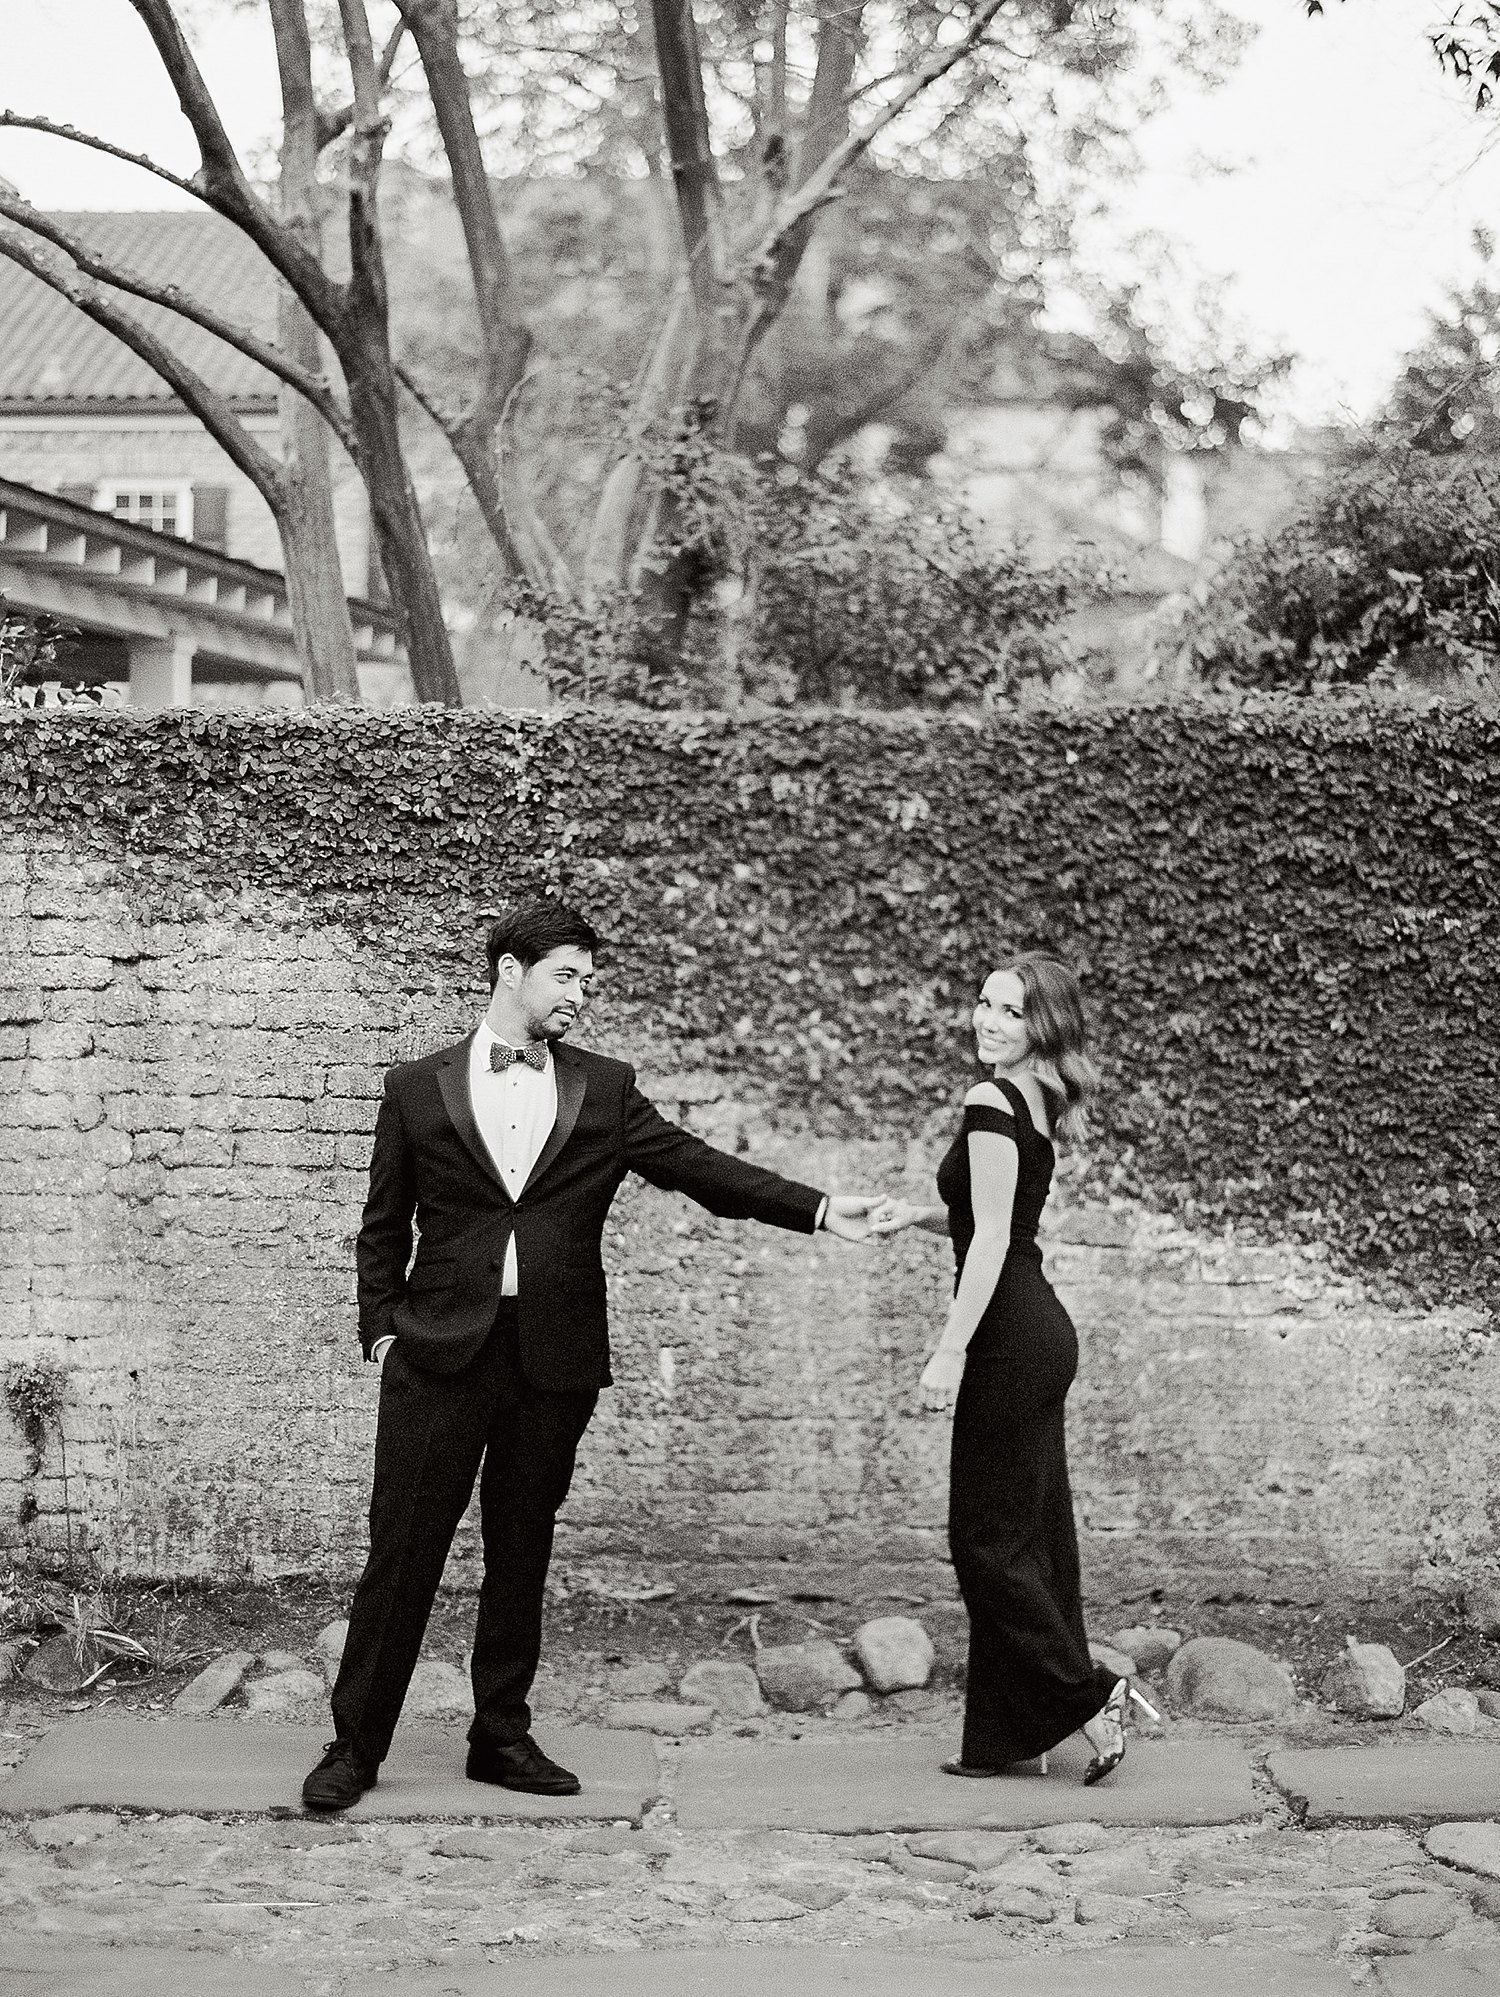 Man in tuxedo reaching hand out for woman in black dress on cobblestone alley and brick wall